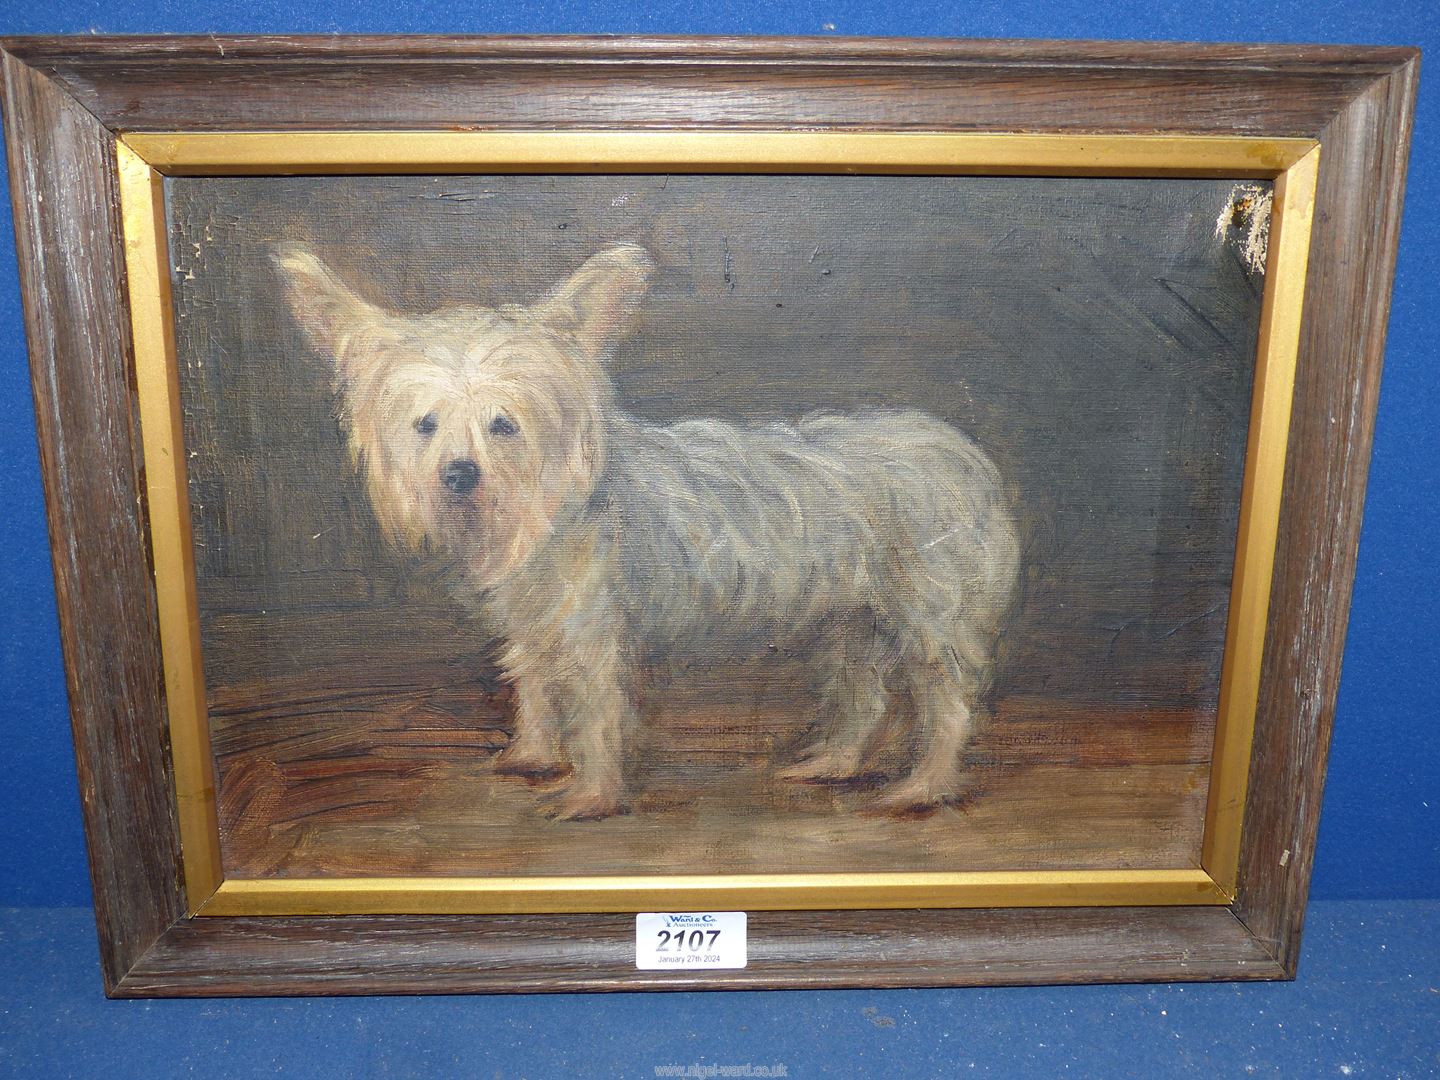 A wooden framed Oil on canvas depicting a Terrier, no visible signature, 16" x 12 1/4".